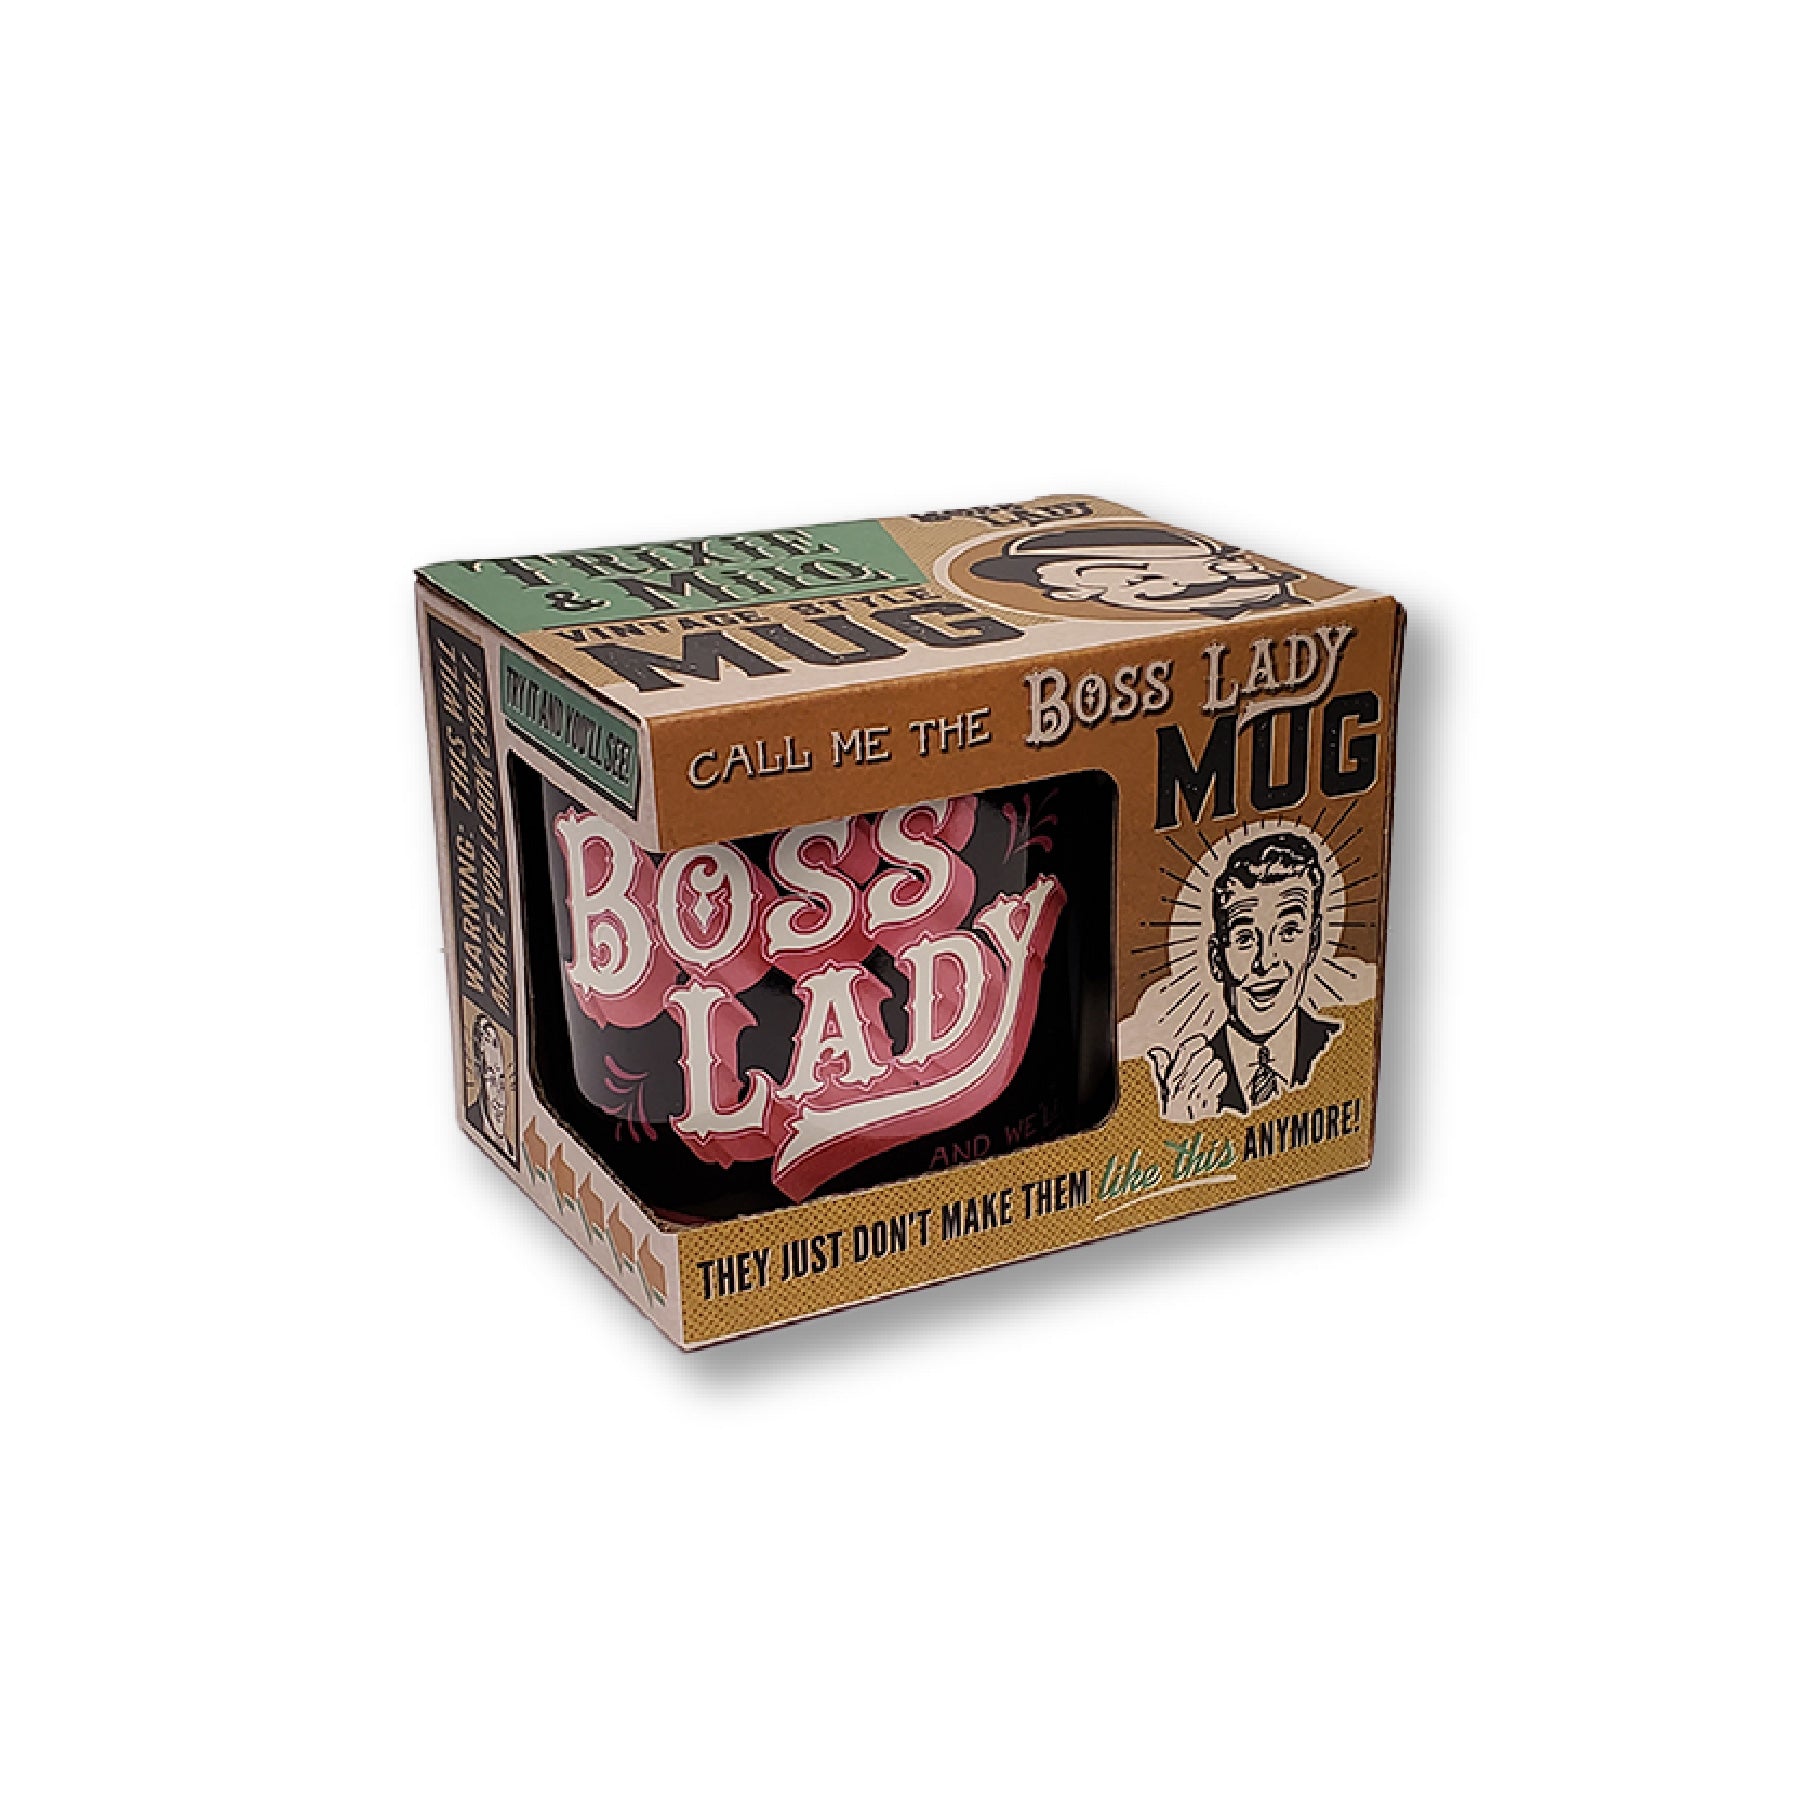 ceramic tea or coffee mug. cafe cup reads "Boss Lady" in pink, black, and off white retro vintage style. pictured in kitschy gift box